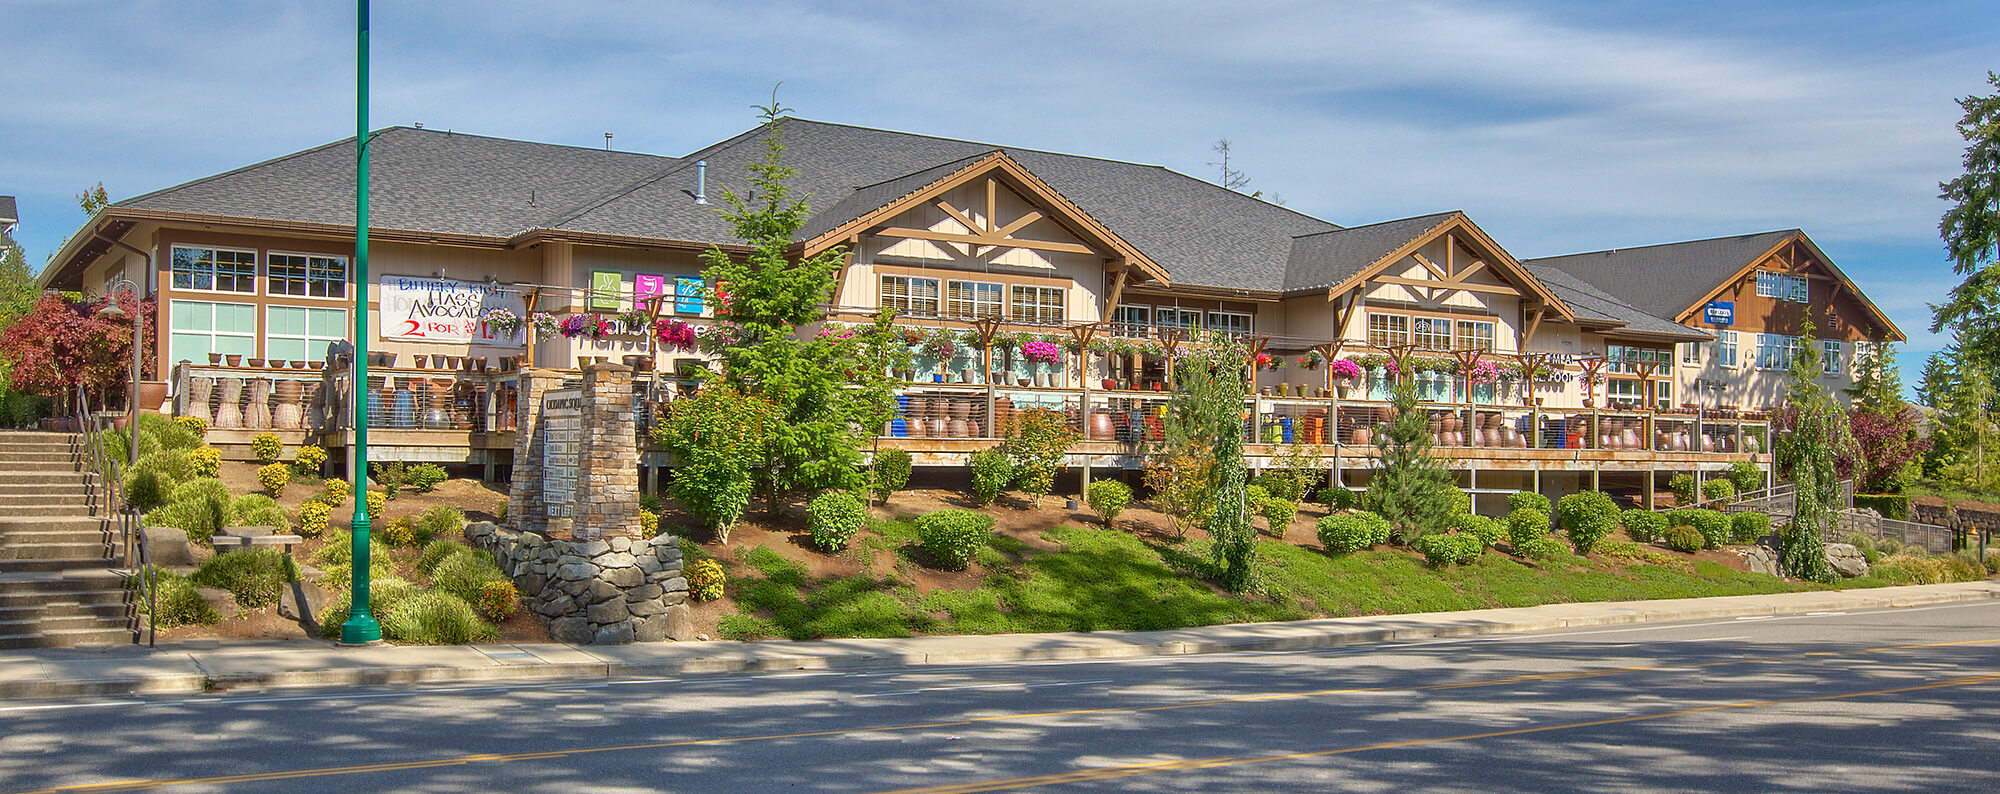 Olympic Retail in Gig Harbor